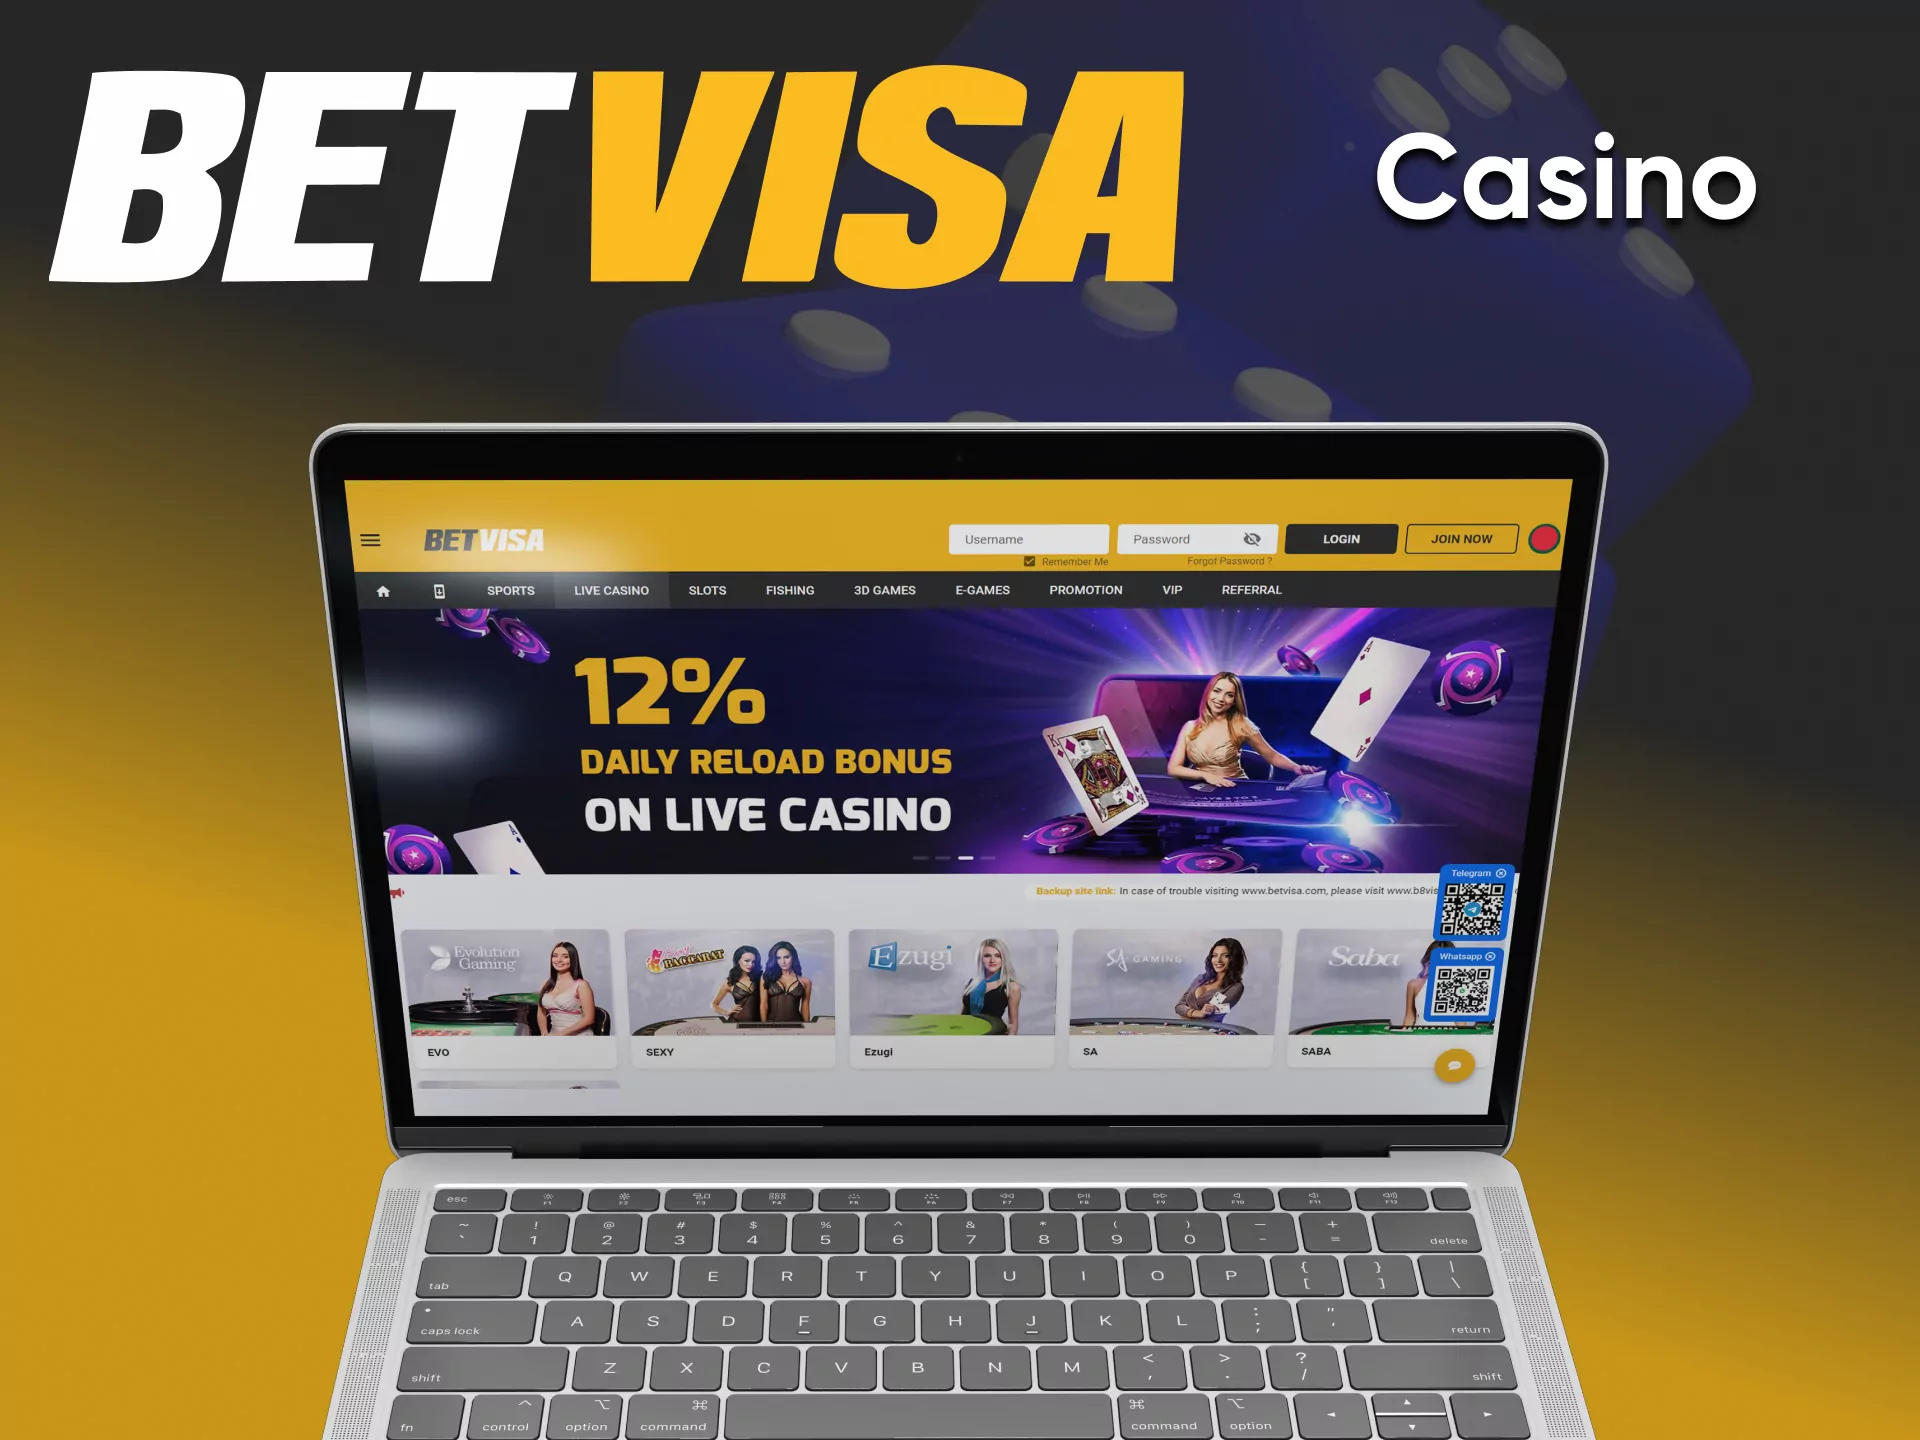 Visit the casino site from BetVisa.